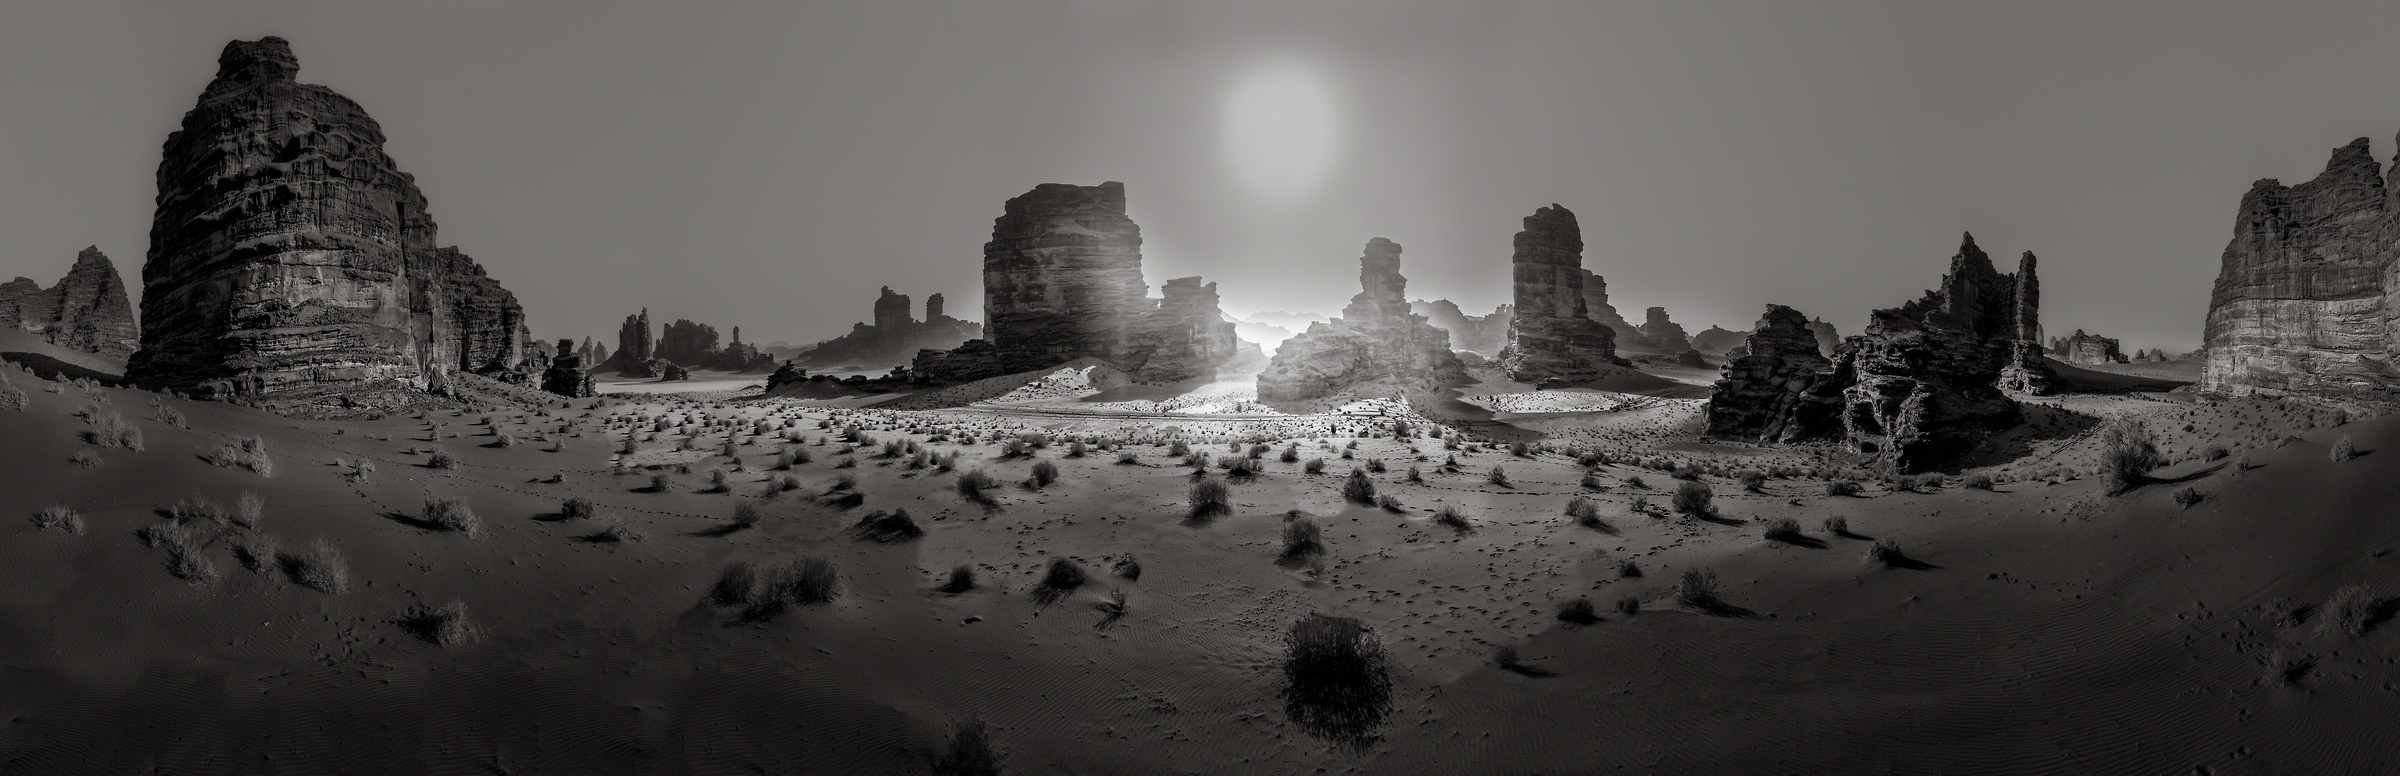 1,025 megapixels! A very high resolution, large-format VAST photo print of the sun in the desert with interesting rock formations; fine art black & white photograph created by Peter Rodger in Tabuk, Saudi Arabia.